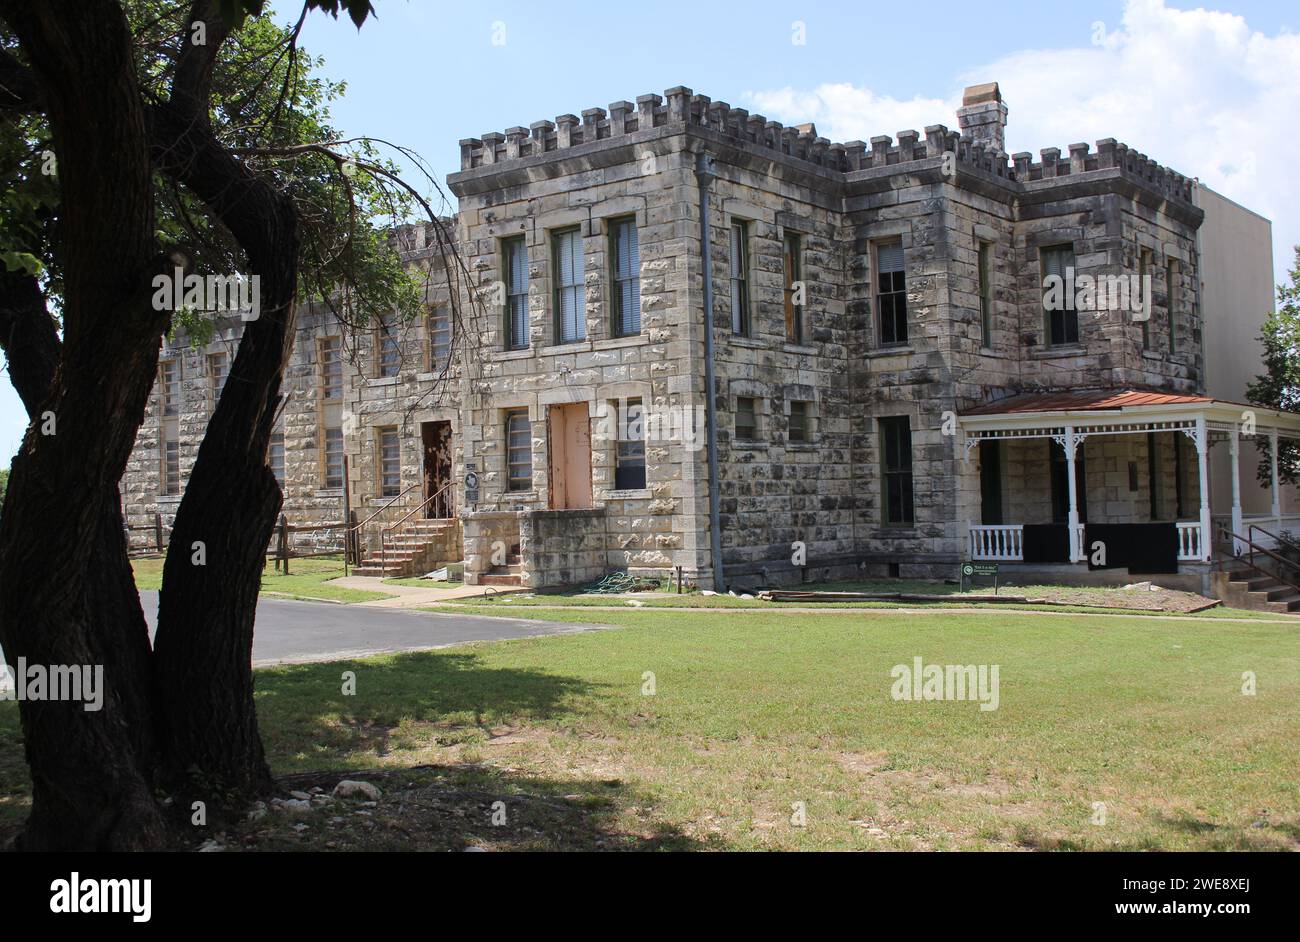 An abandoned Historic Jail Building in Georgetown, TX Stock Photo